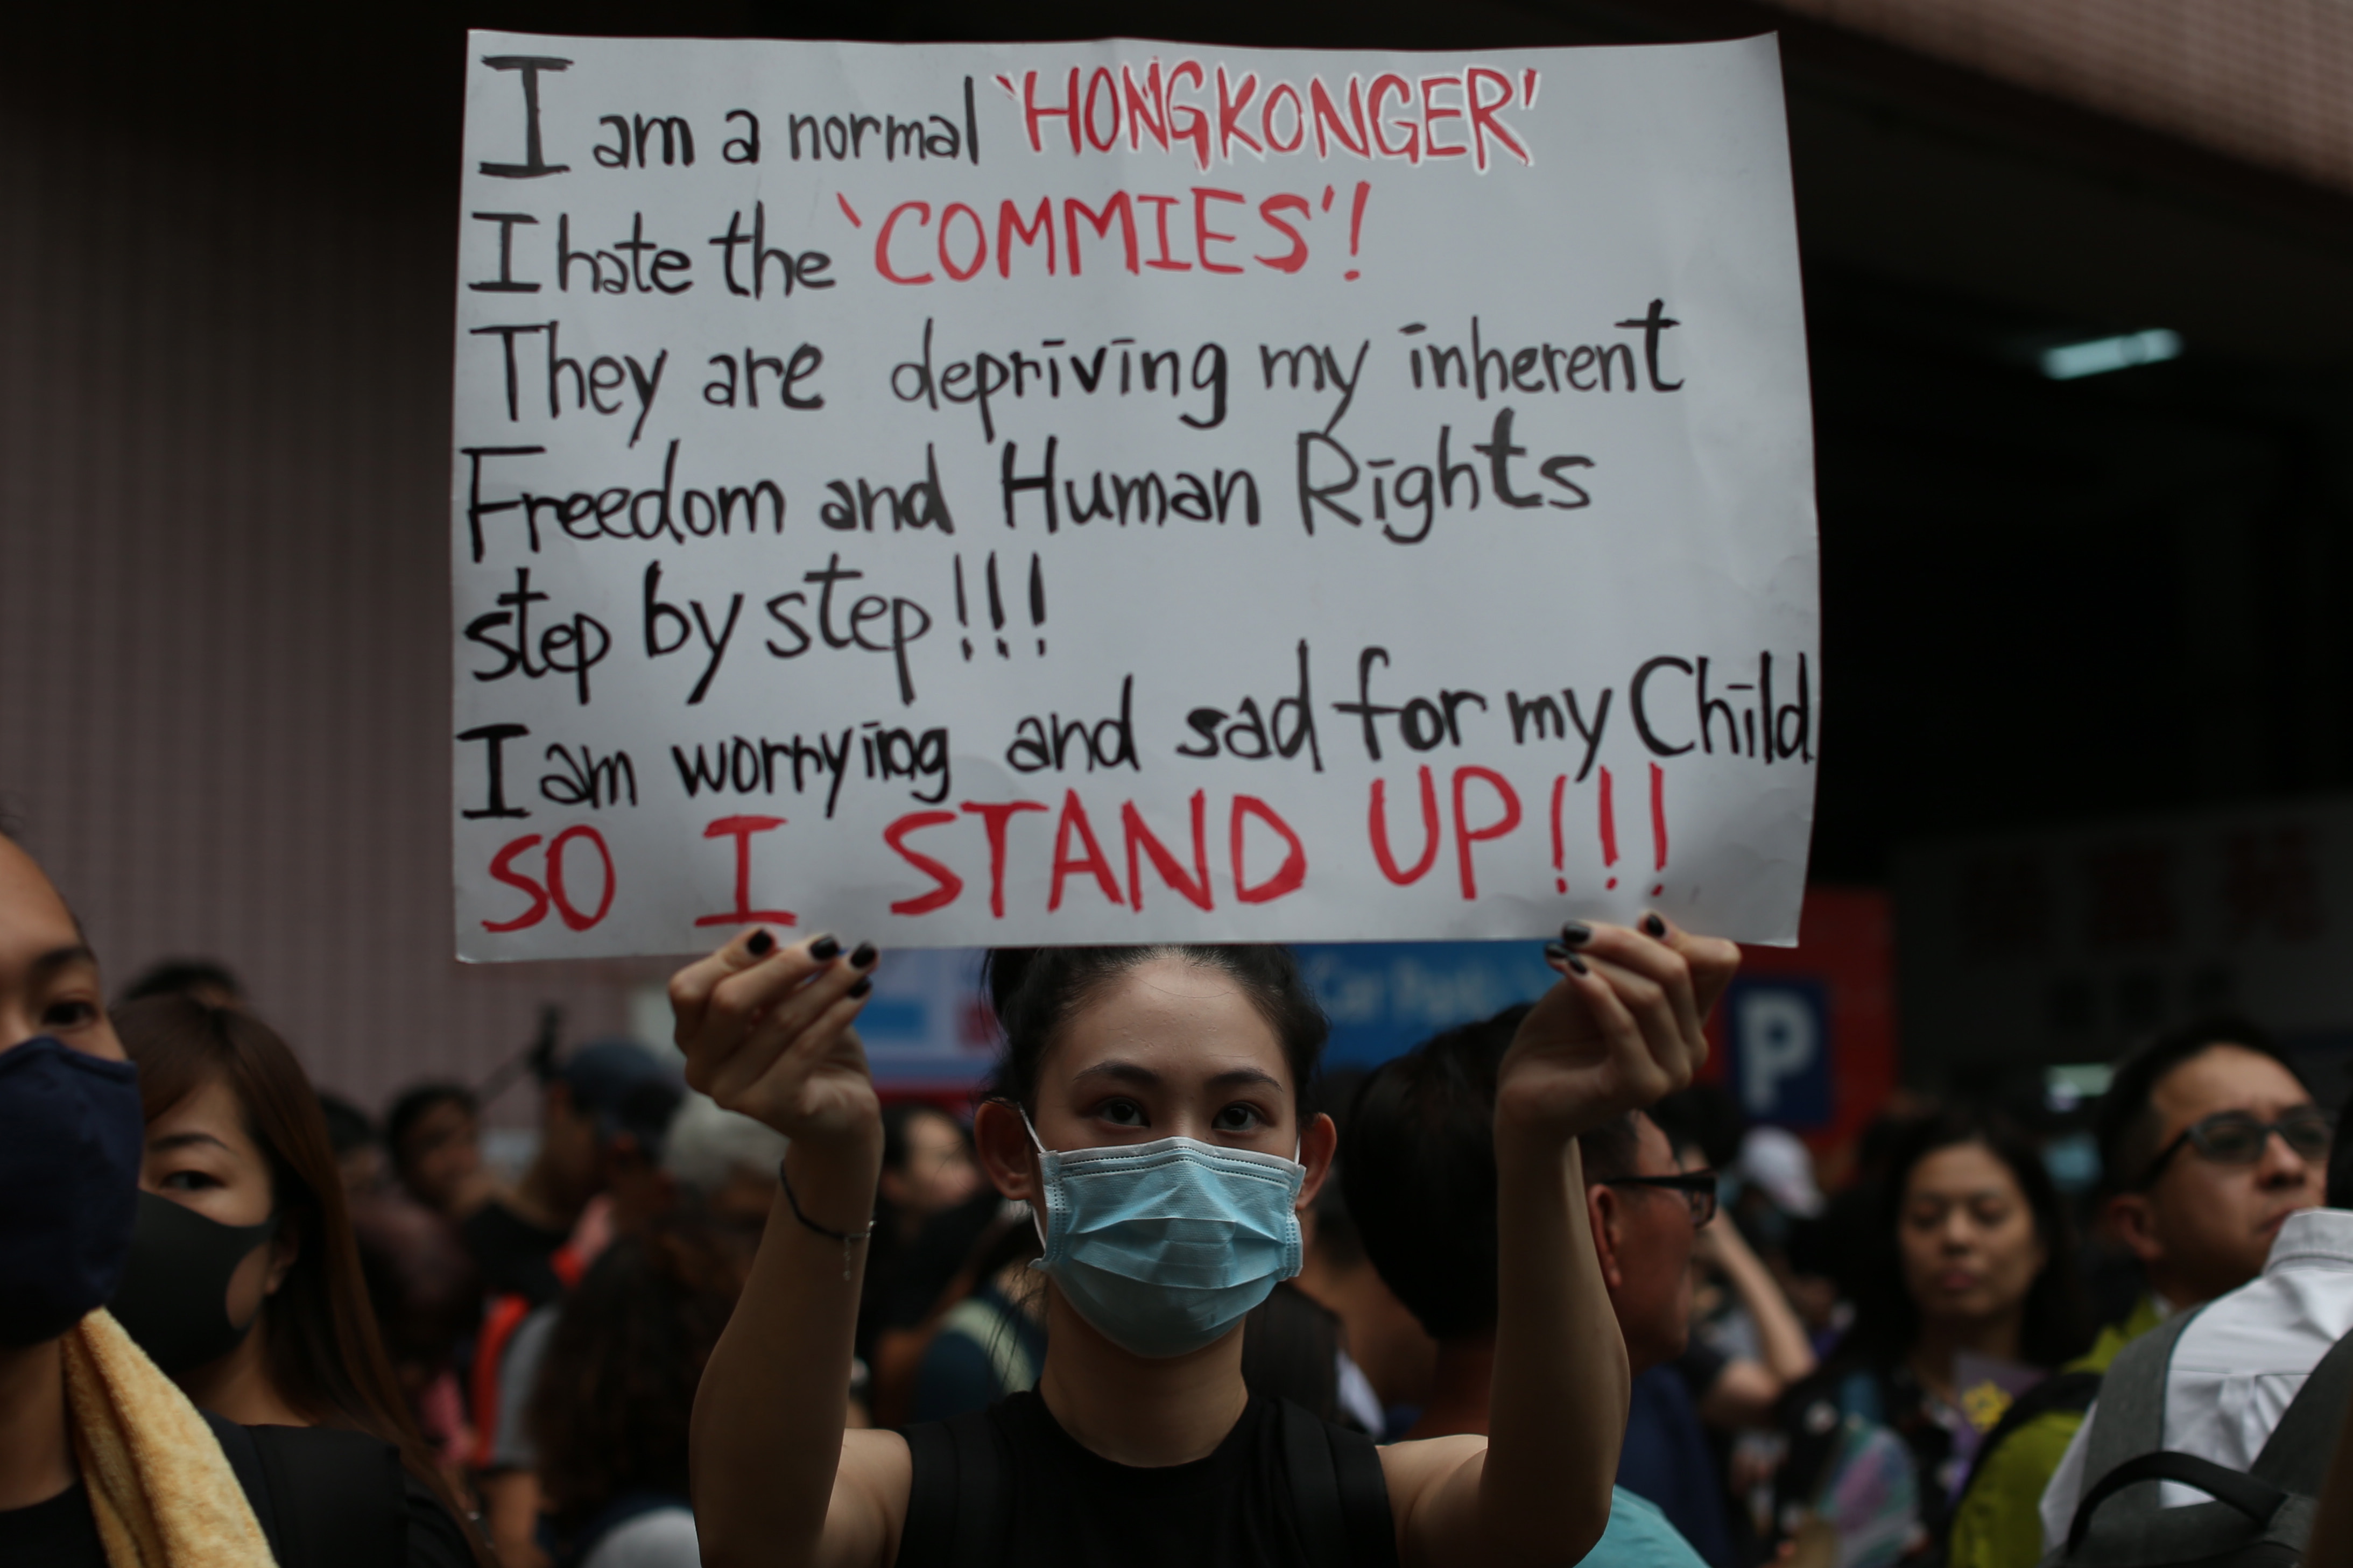 epa07754473 An anti-extradition bill protester holds a banner as she a rally in Mongkok district, Hong Kong, China, 03 August 2019. Hong Kong is bracing itself for a ninth consecutive weekend of multiple anti-extradition demonstrations and a planned citywide strike on 05 August.  EPA/JEROME FAVRE